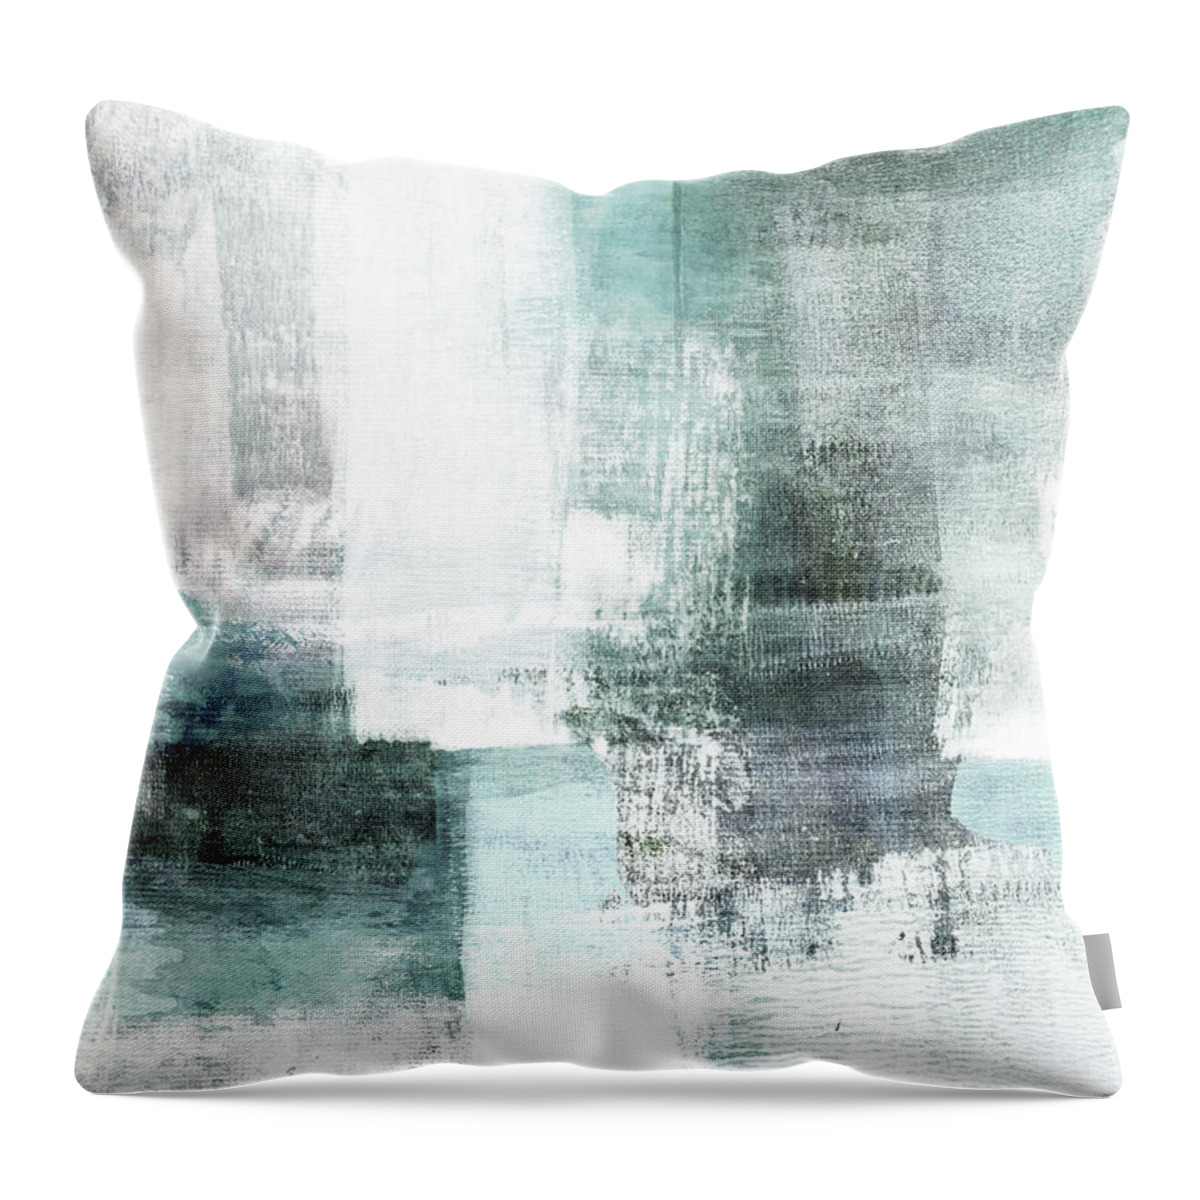 Aqua Throw Pillow featuring the painting Aqua Blue and Grey Modern Abstract Landscape Painting by Janine Aykens